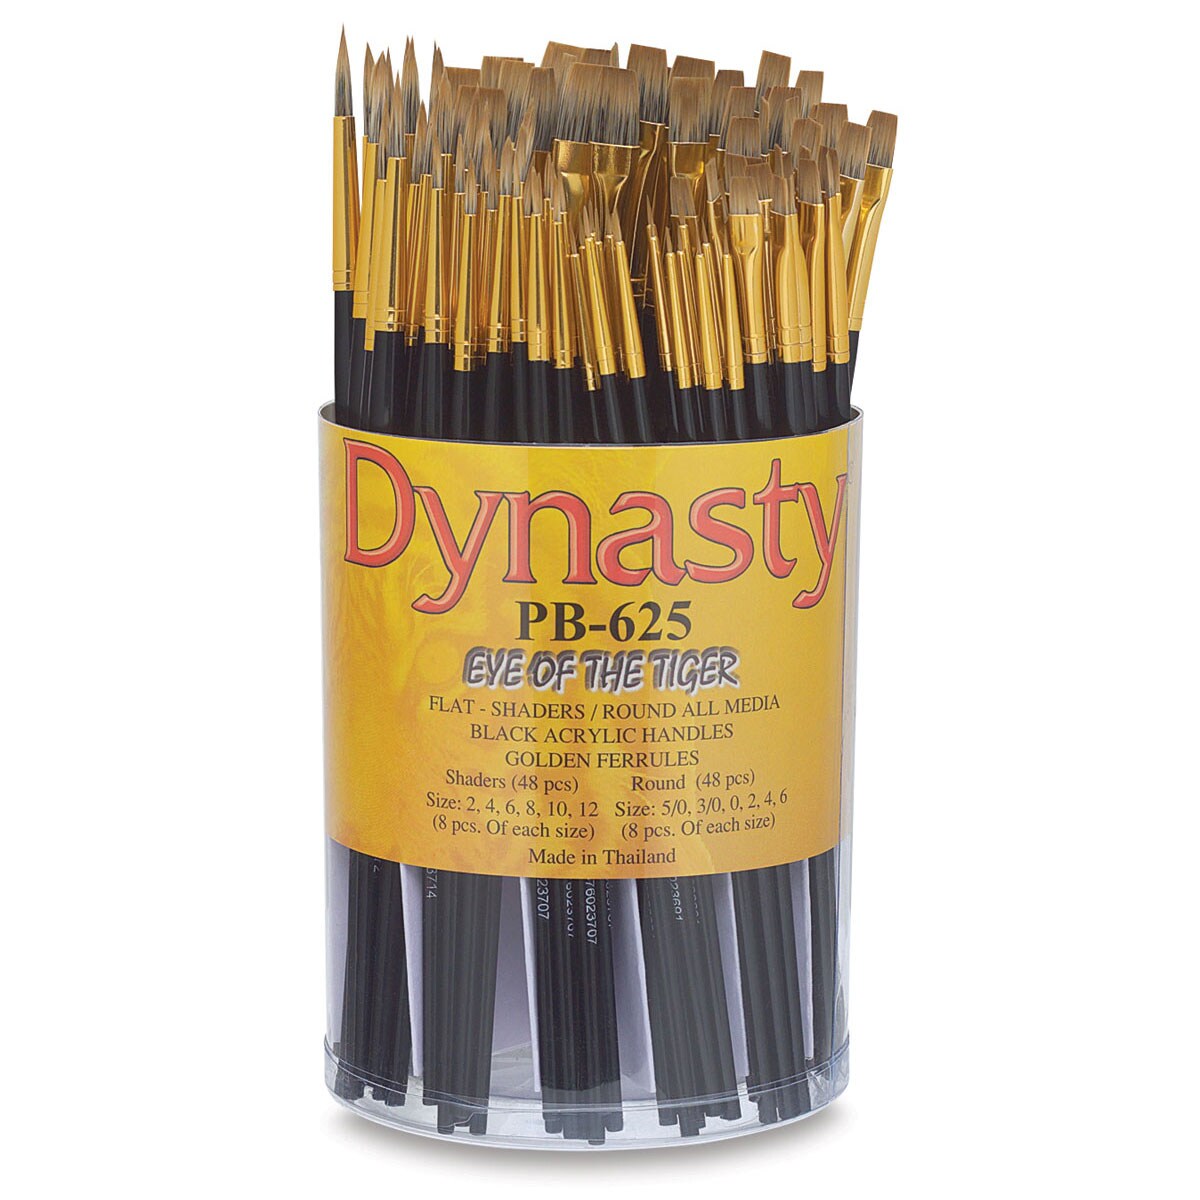 Dynasty Eye of the Tiger Brush Set - Shaders and Rounds, Set of 96